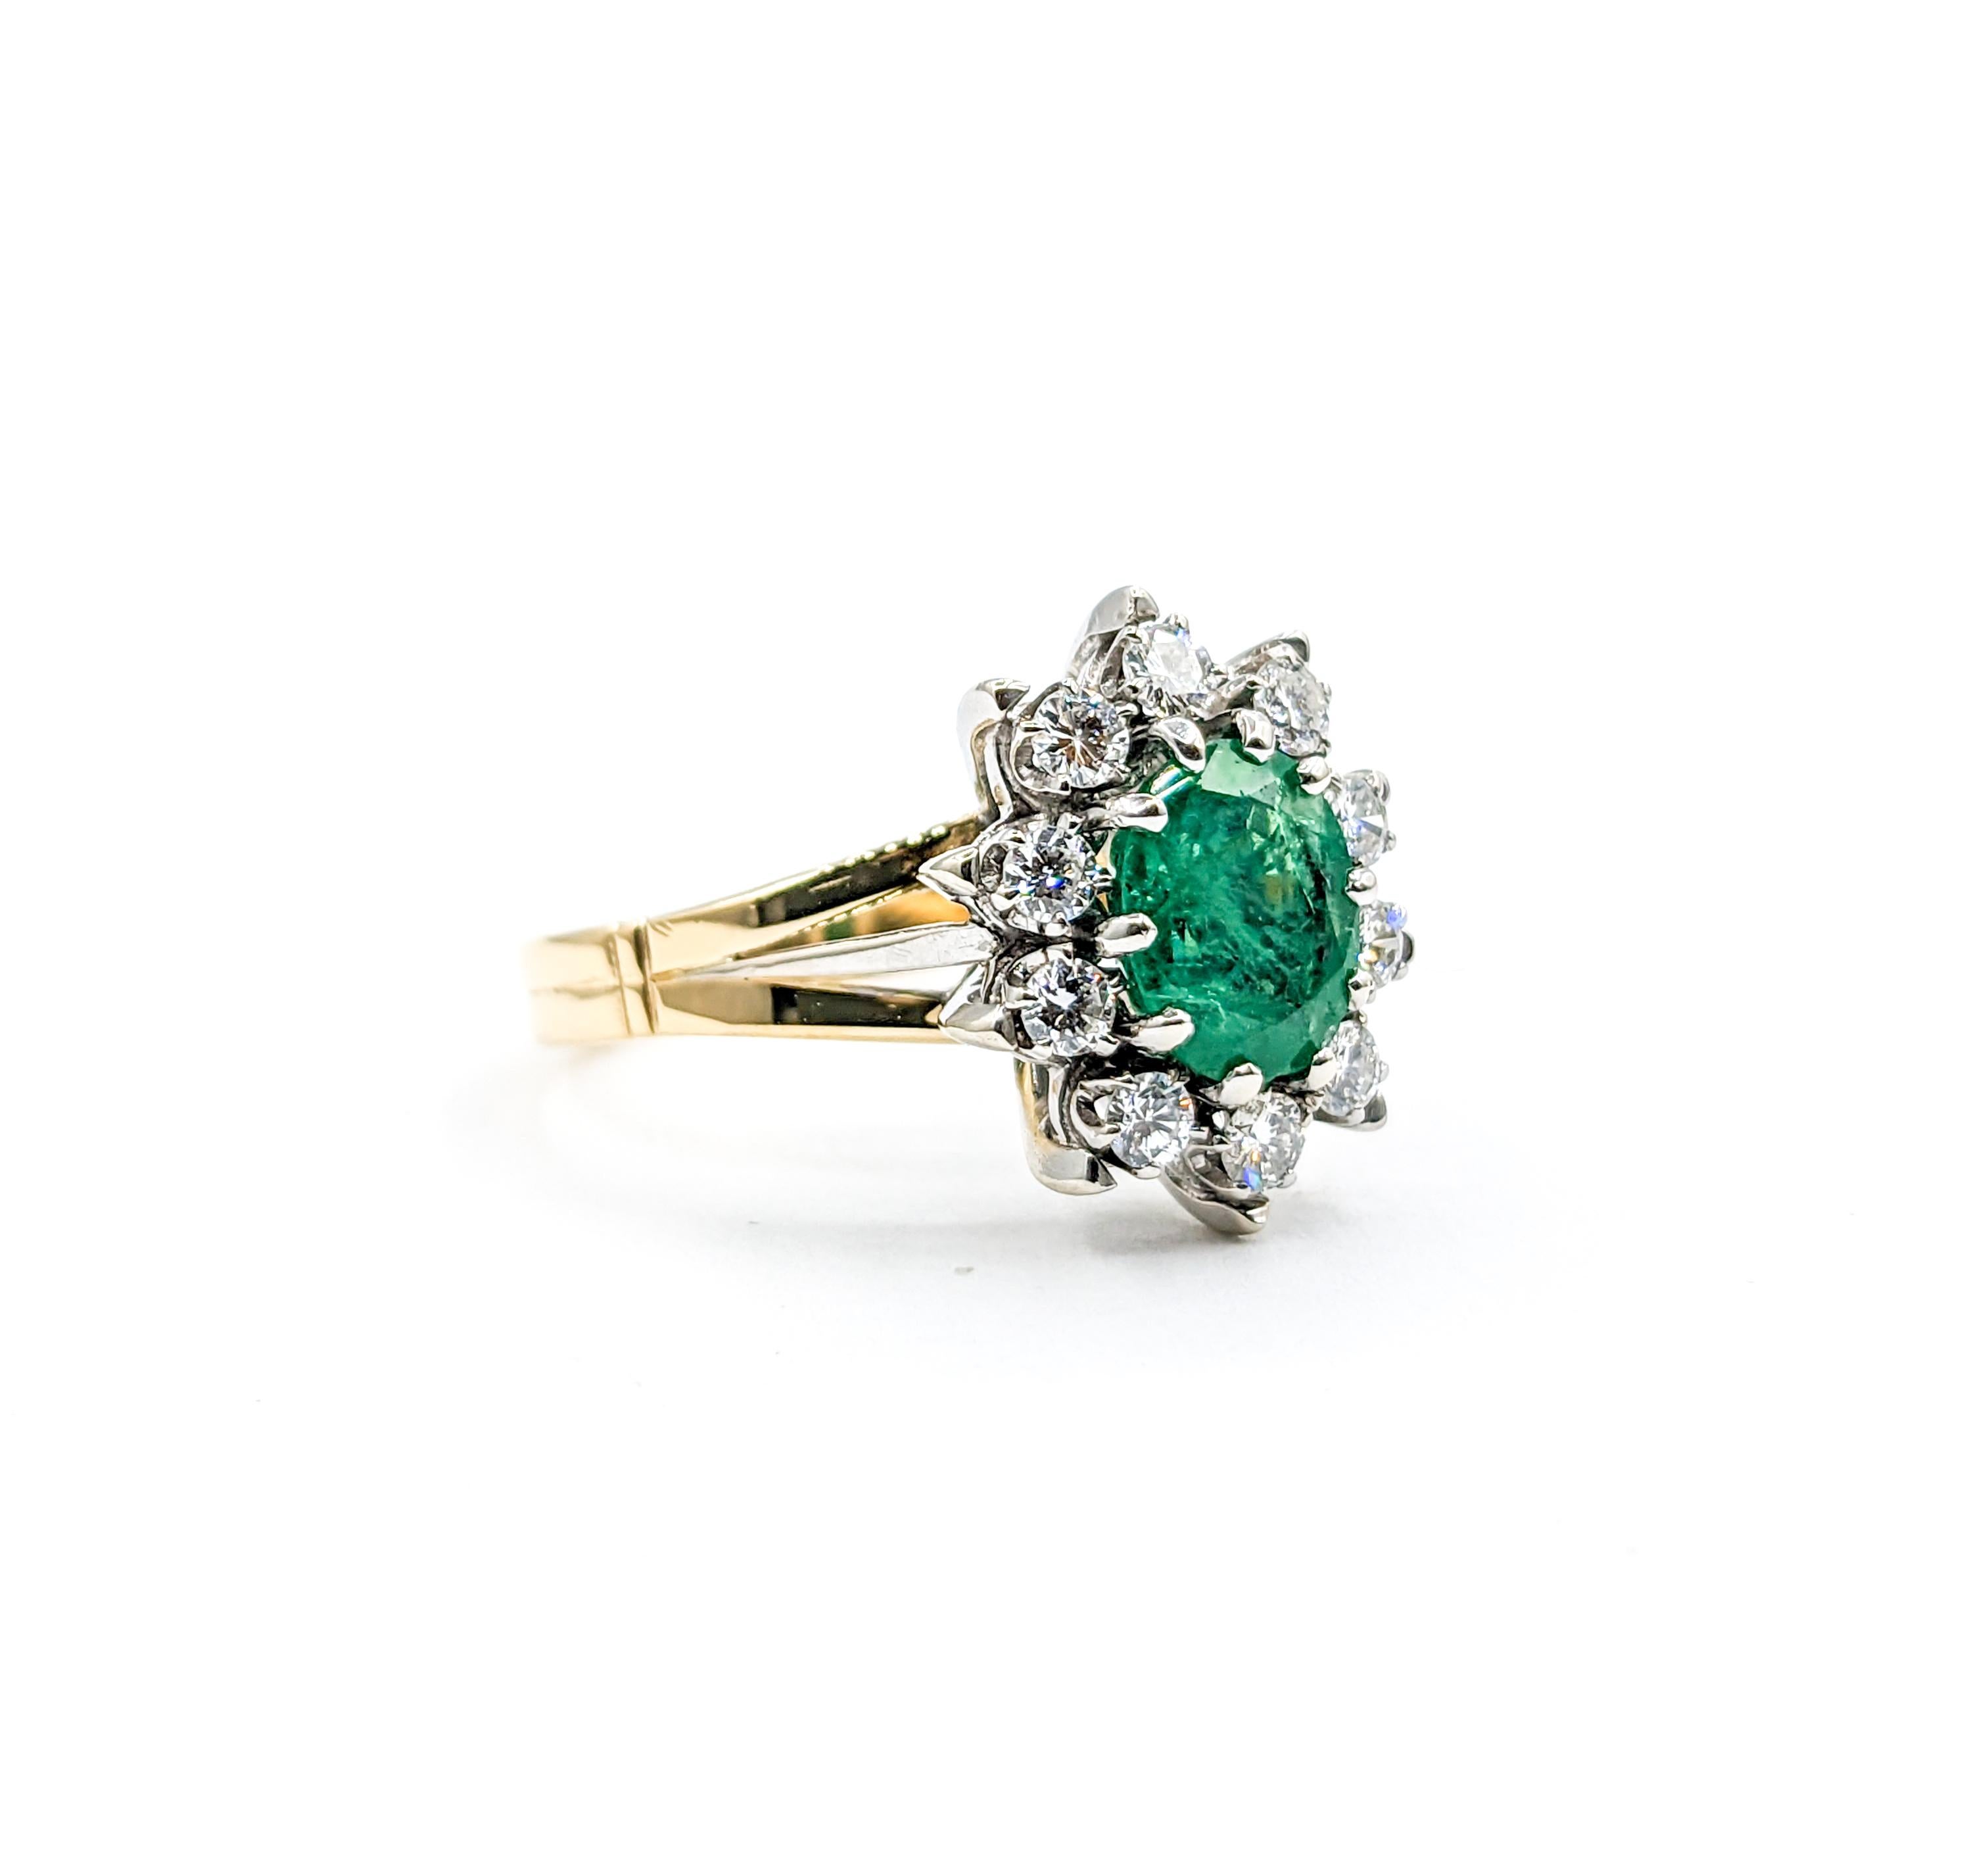 Emerald & Diamond Ring in 18K Gold In Excellent Condition For Sale In Bloomington, MN